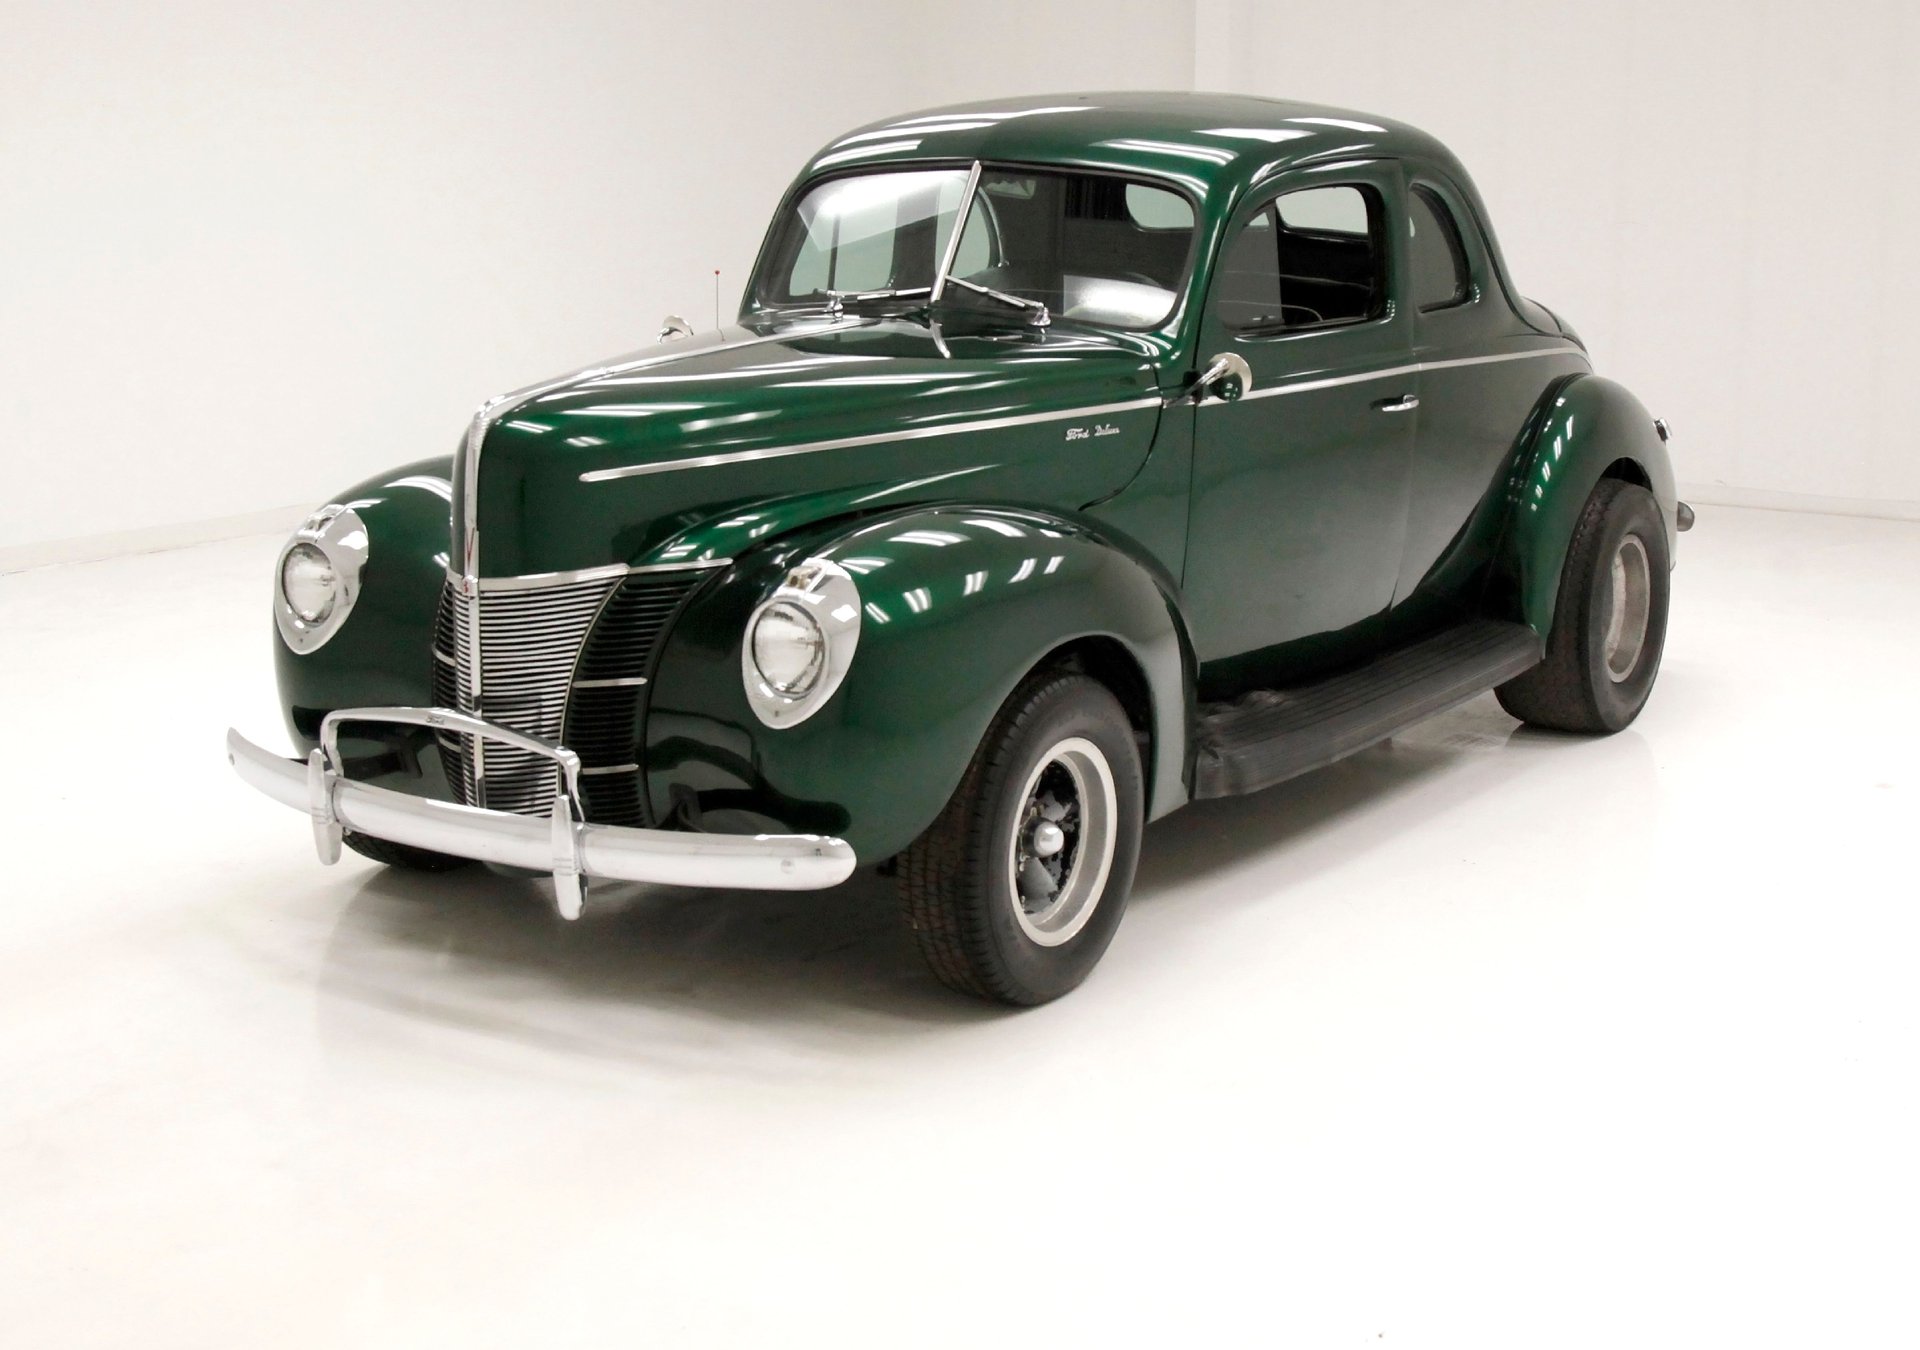 https://cdn.dealeraccelerate.com/cam/34/4186/261540/1920x1440/1940-ford-deluxe-coupe